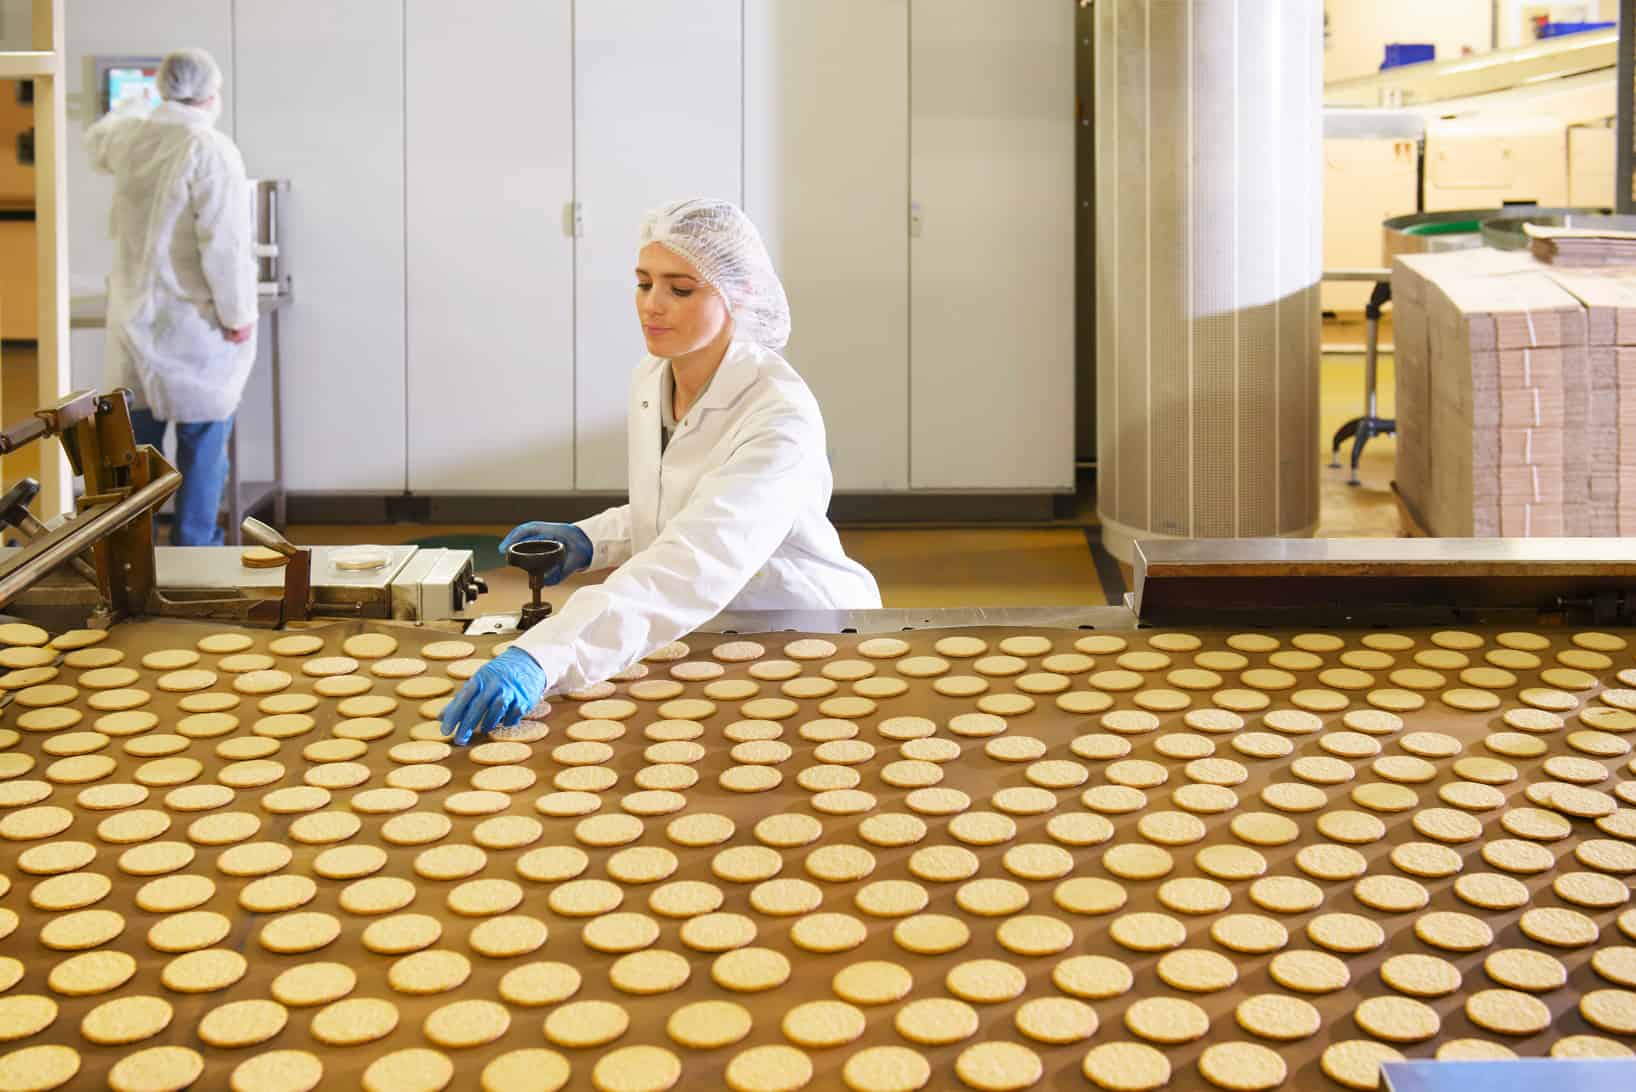 Biscuit factory worker inspecting freshly made biscuits on production line